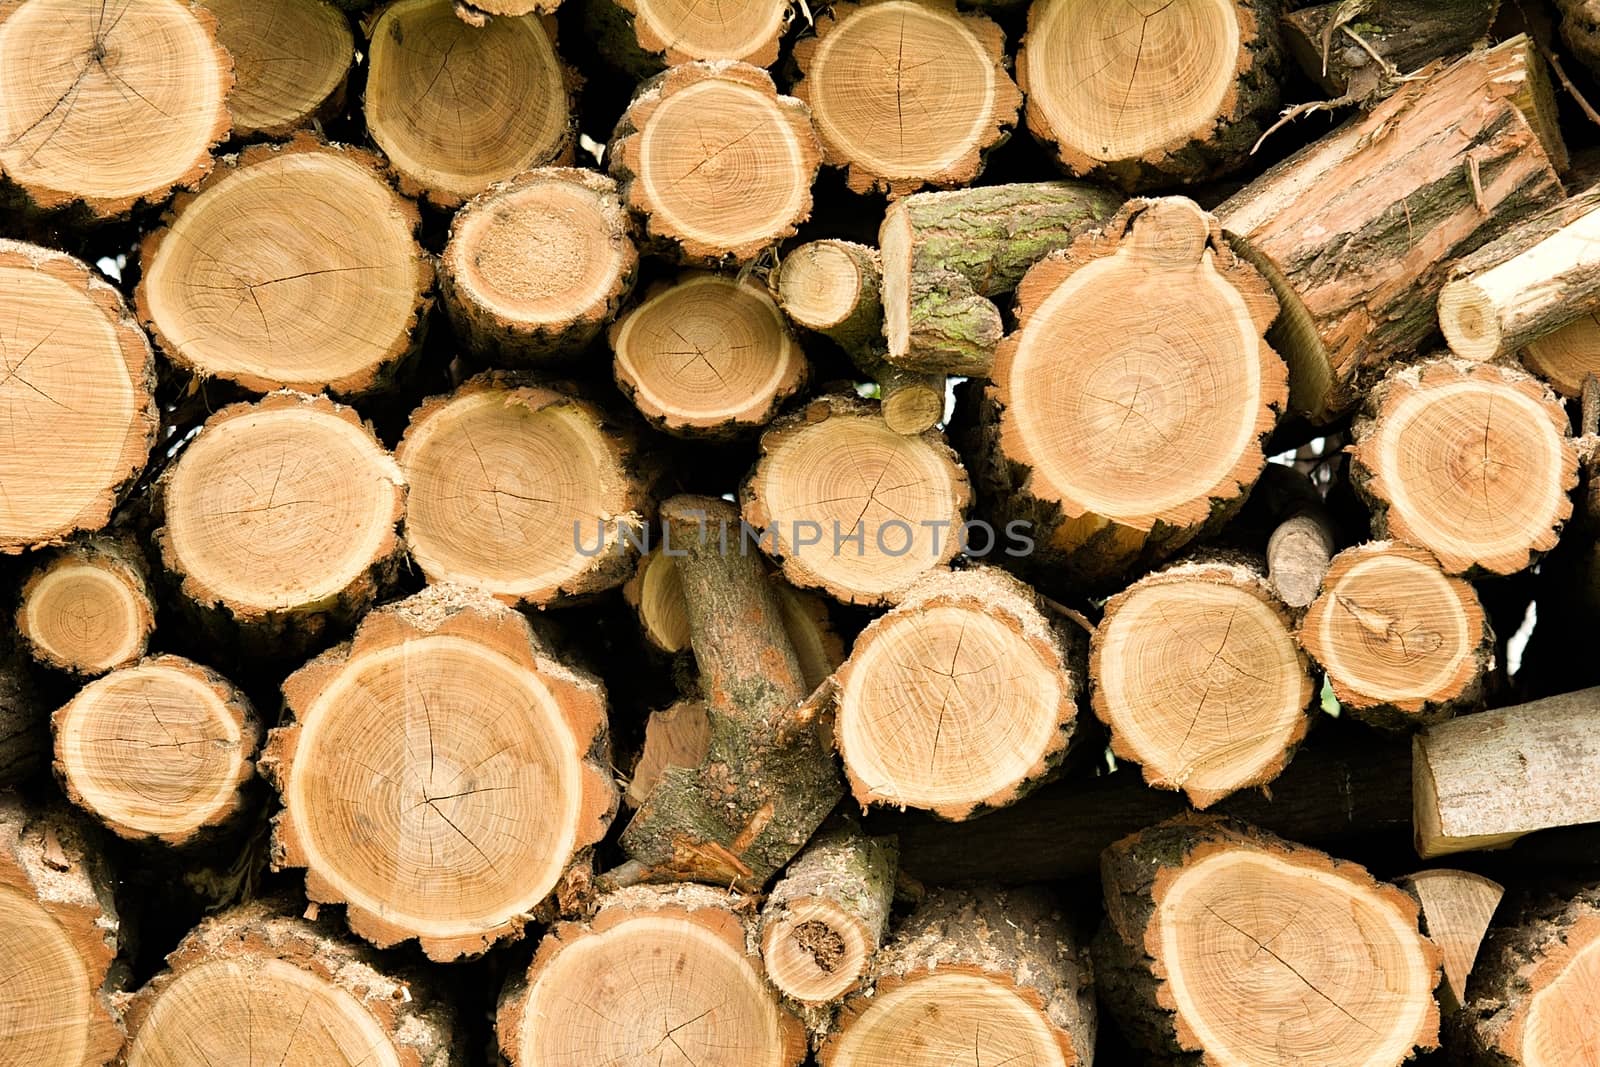 Stacked wood logs by hamik